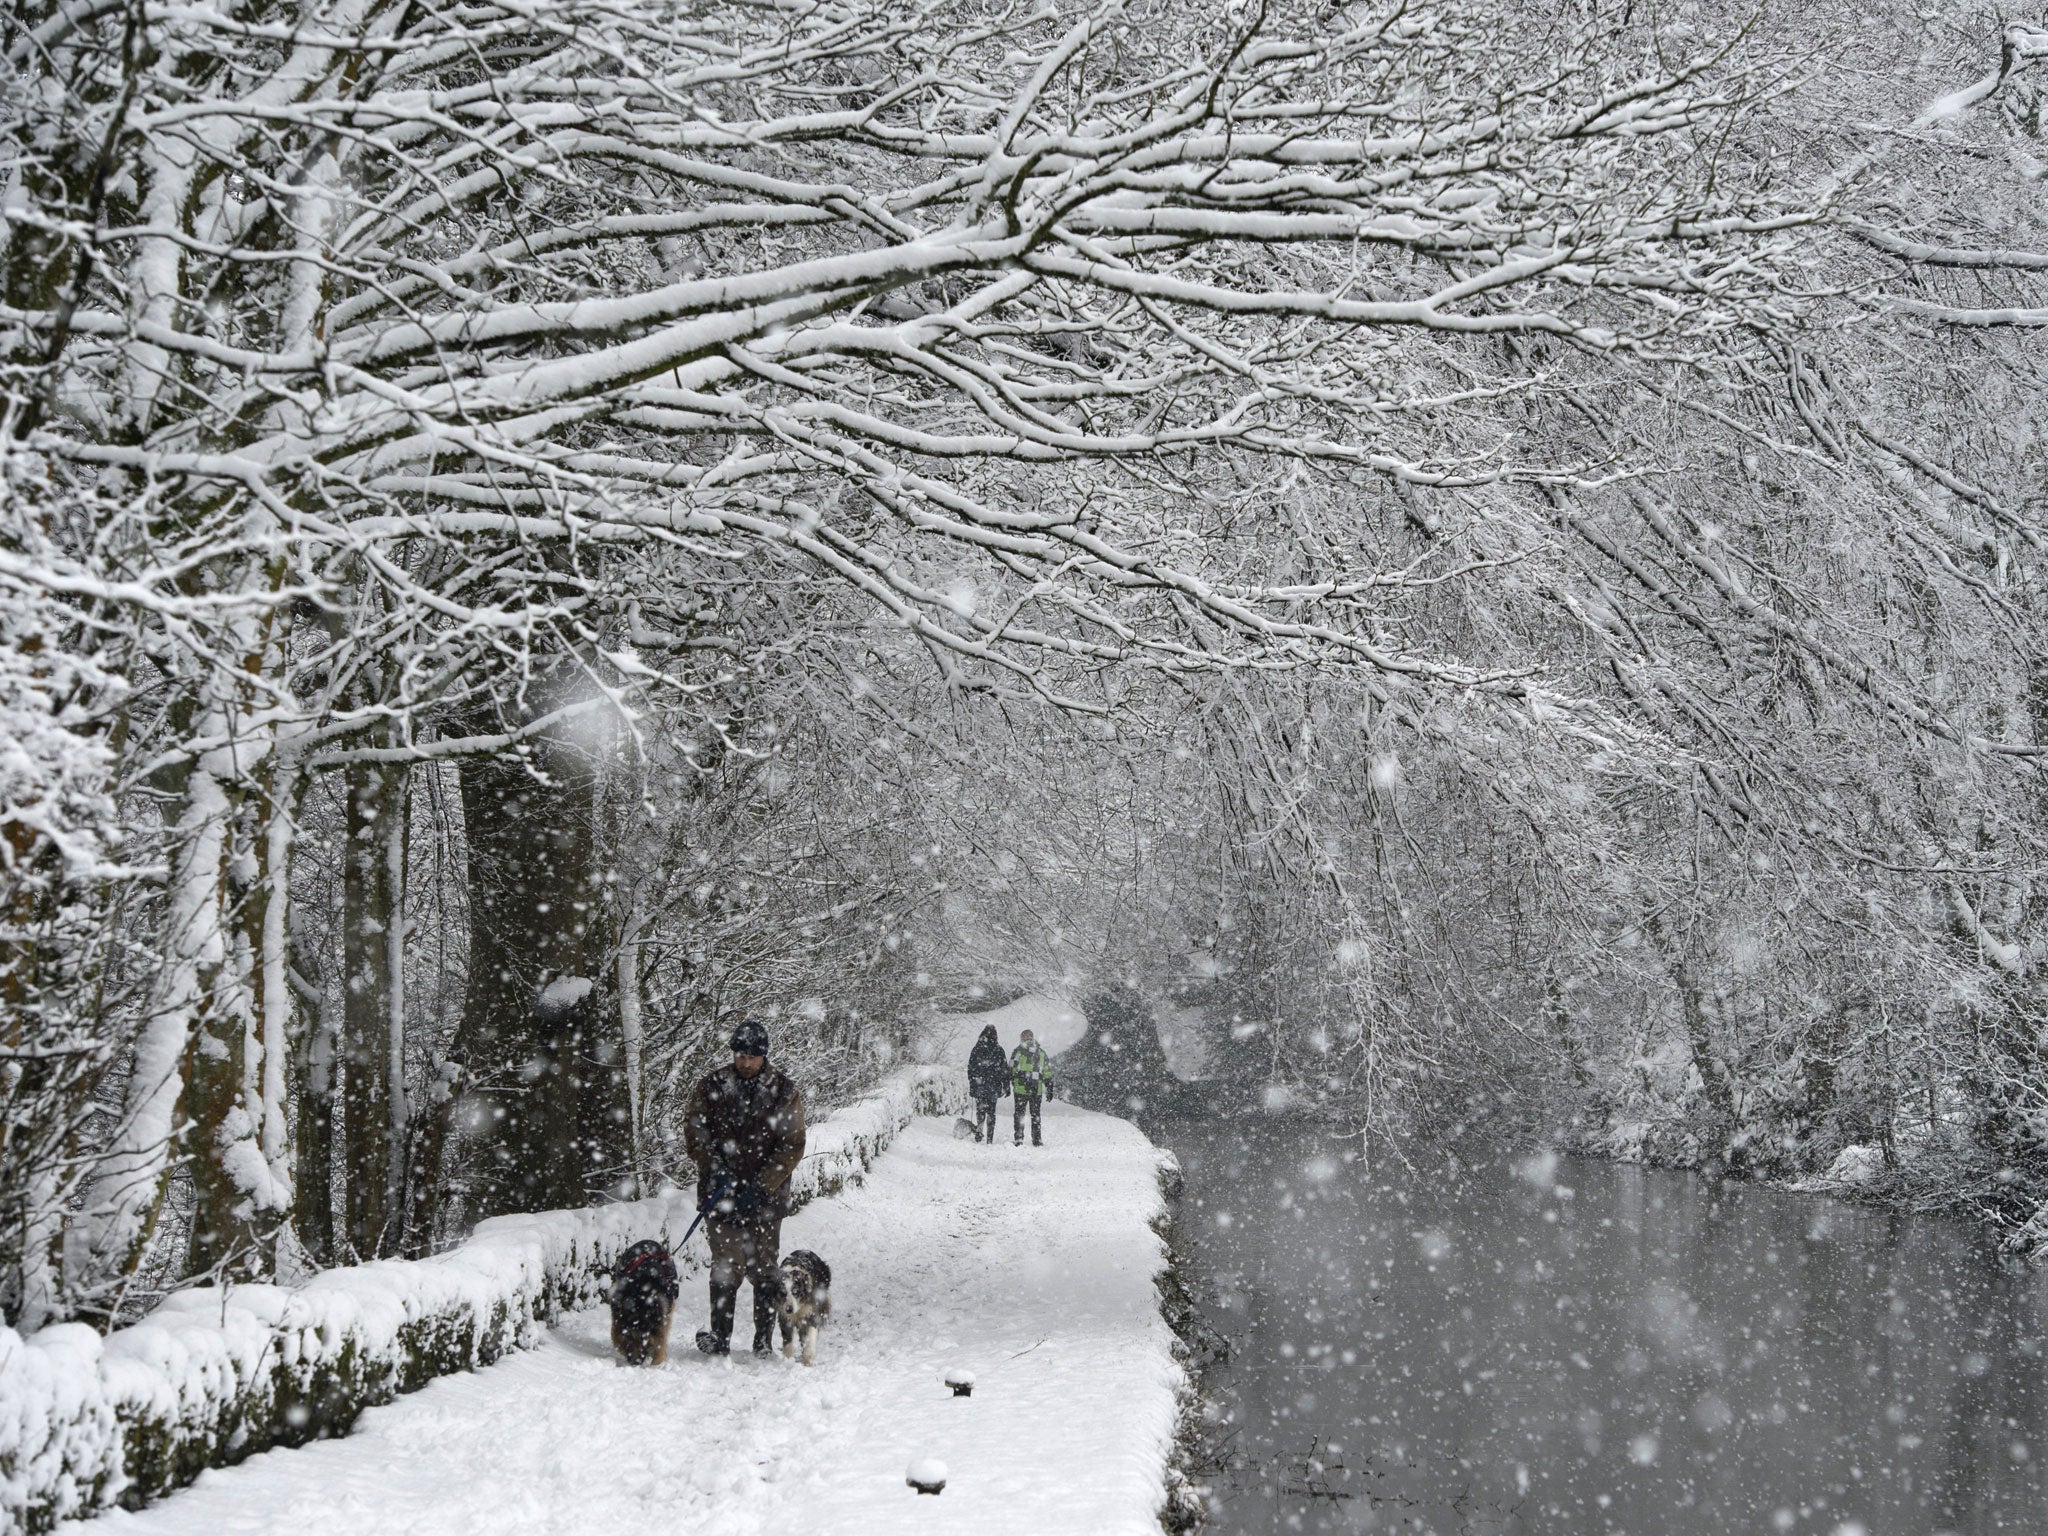 A man walks his dogs along the snow-covered towpath of the Huddersfield Narrow Canal in the village of Marsden, northern England, on January 21, 2015, during heavy snowfall. A Met Office warning of snow is in place Wednesday for the west coast of Scotland